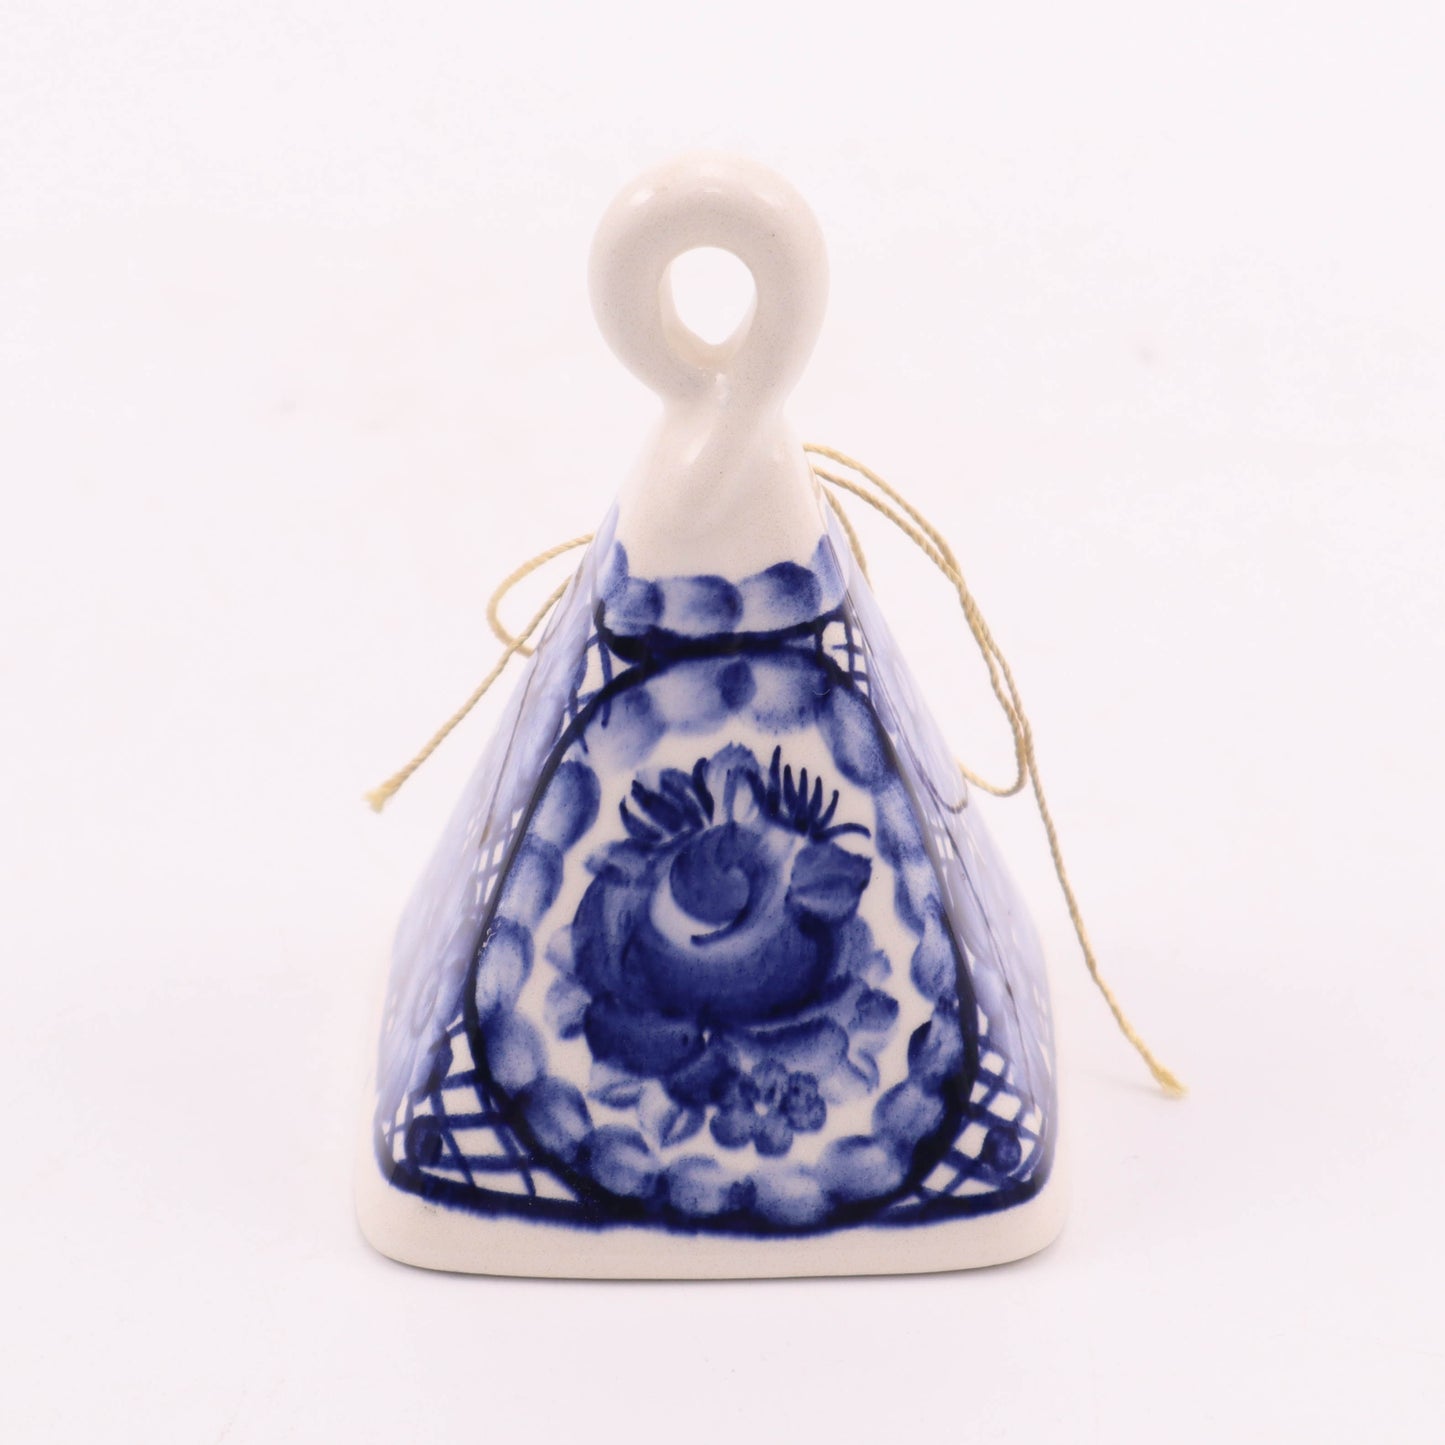 2.5"x3.5" Square Bell Ornament. Pattern: Heritage